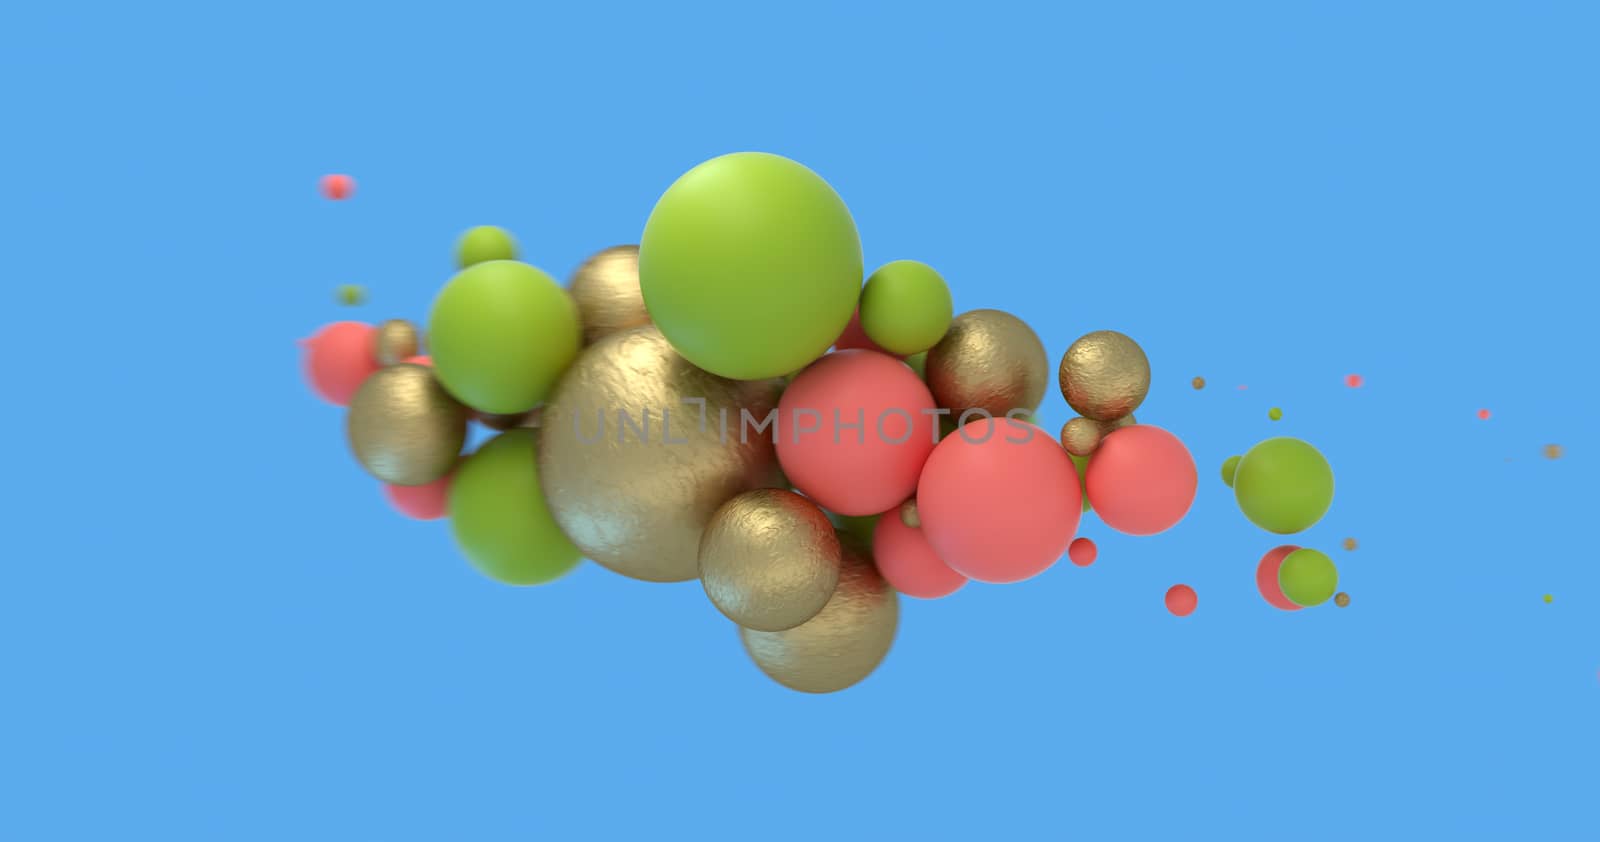 Abstract background with Living Coral, golden and green spheres on blue. Fashion sale banner design. 3D render illustration by Shanvood